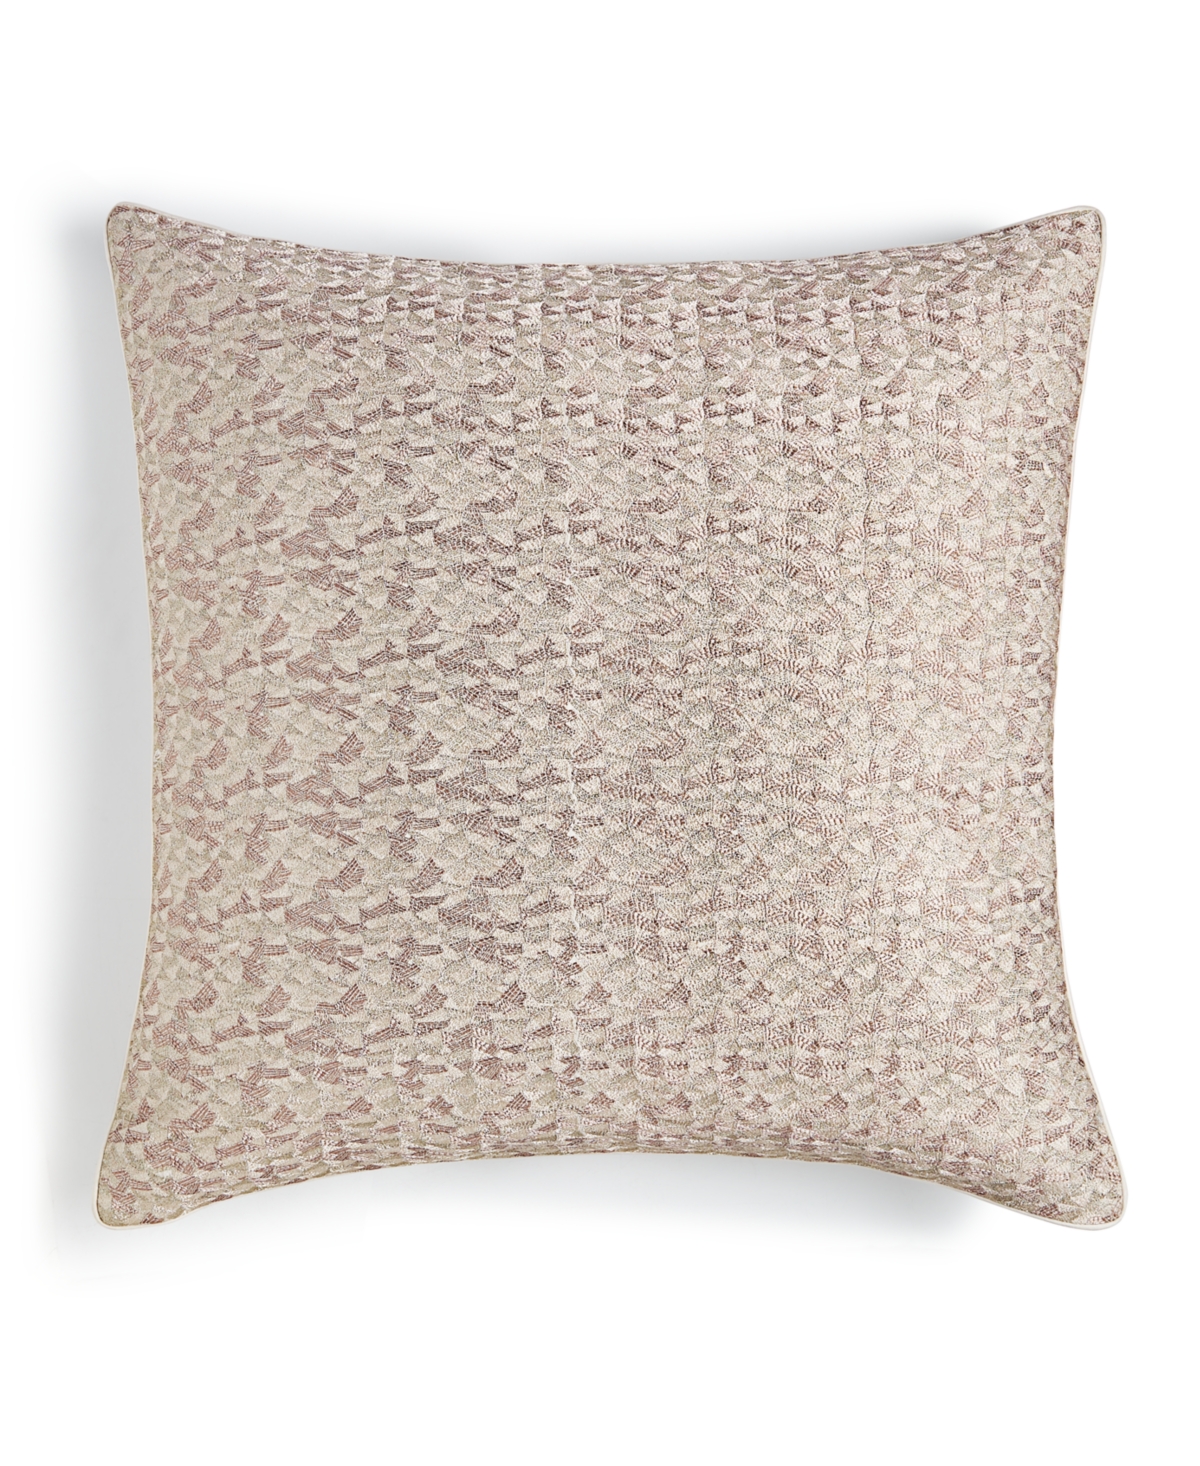 Closeout! Hotel Collection Highlands Sham, European, Created for Macy's - Taupe